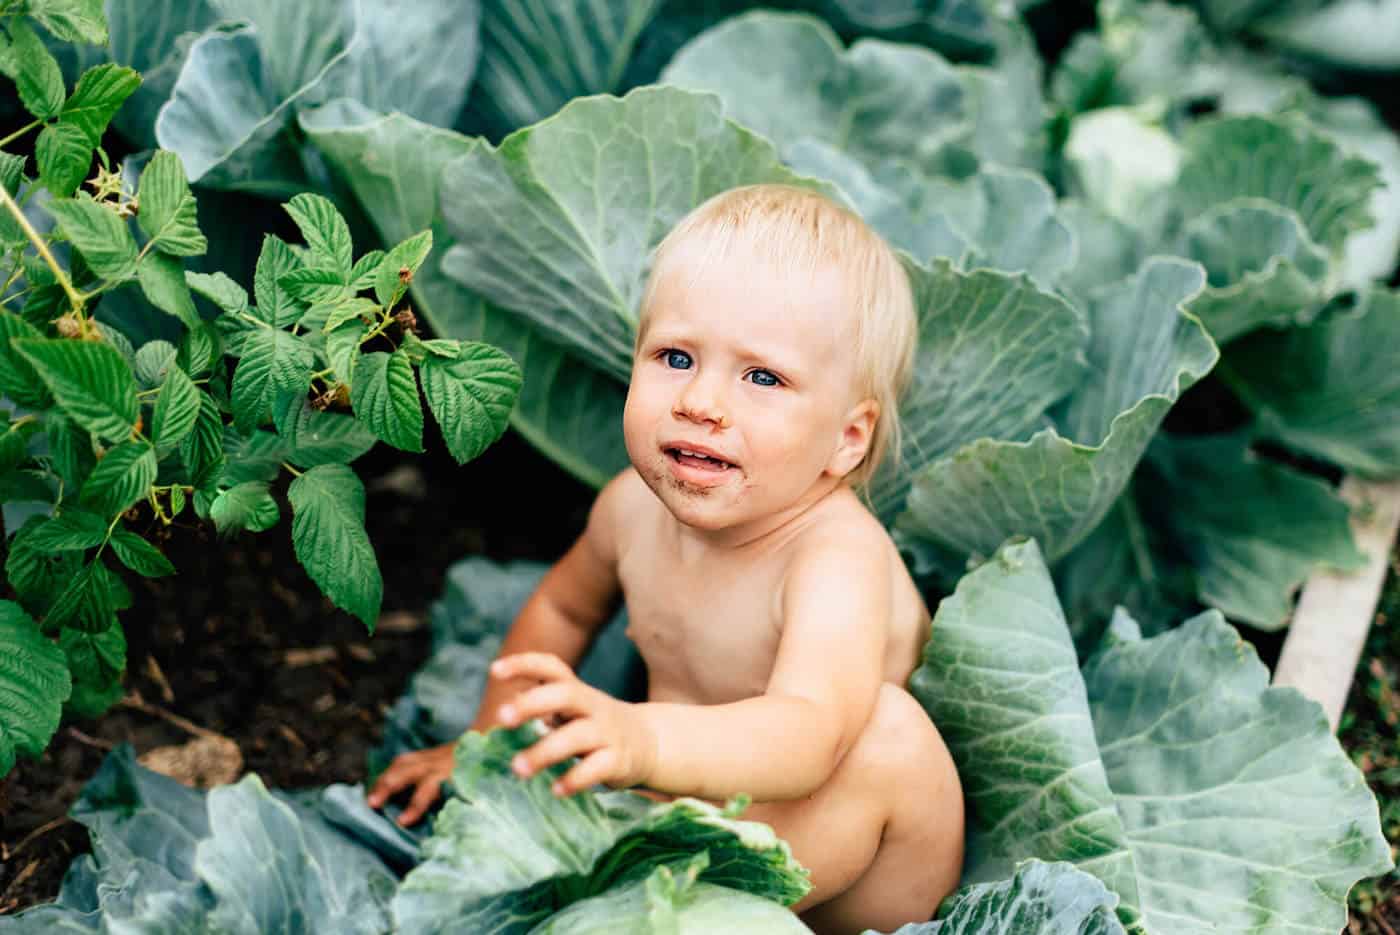 baby boy in garden surrounded by plants